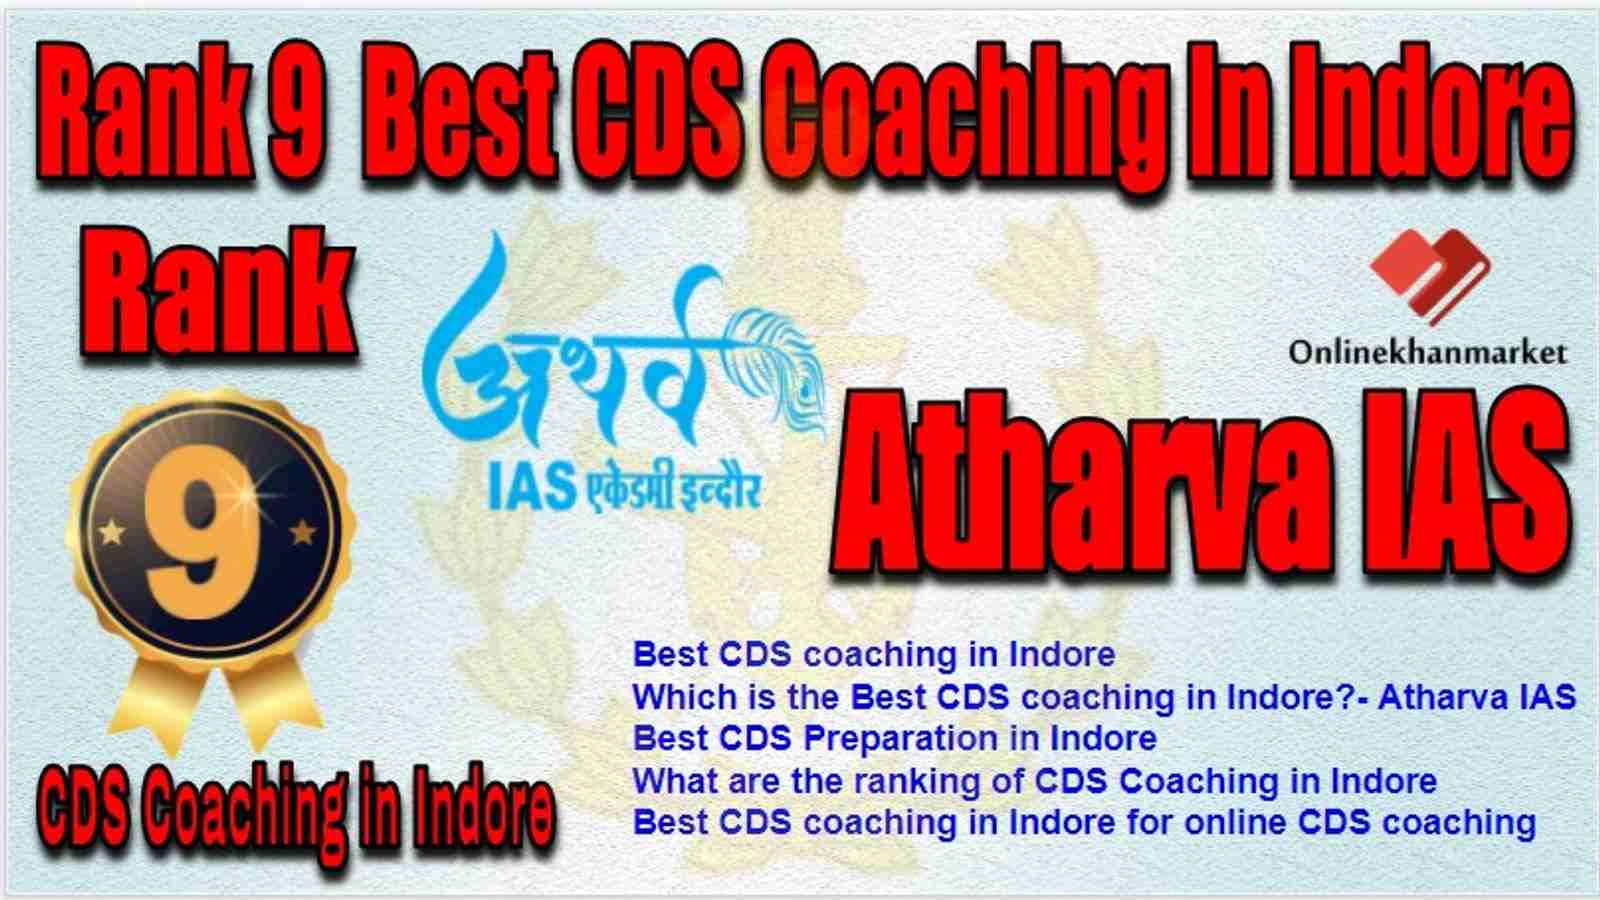 Rank 9 Best CDS Coaching in indore